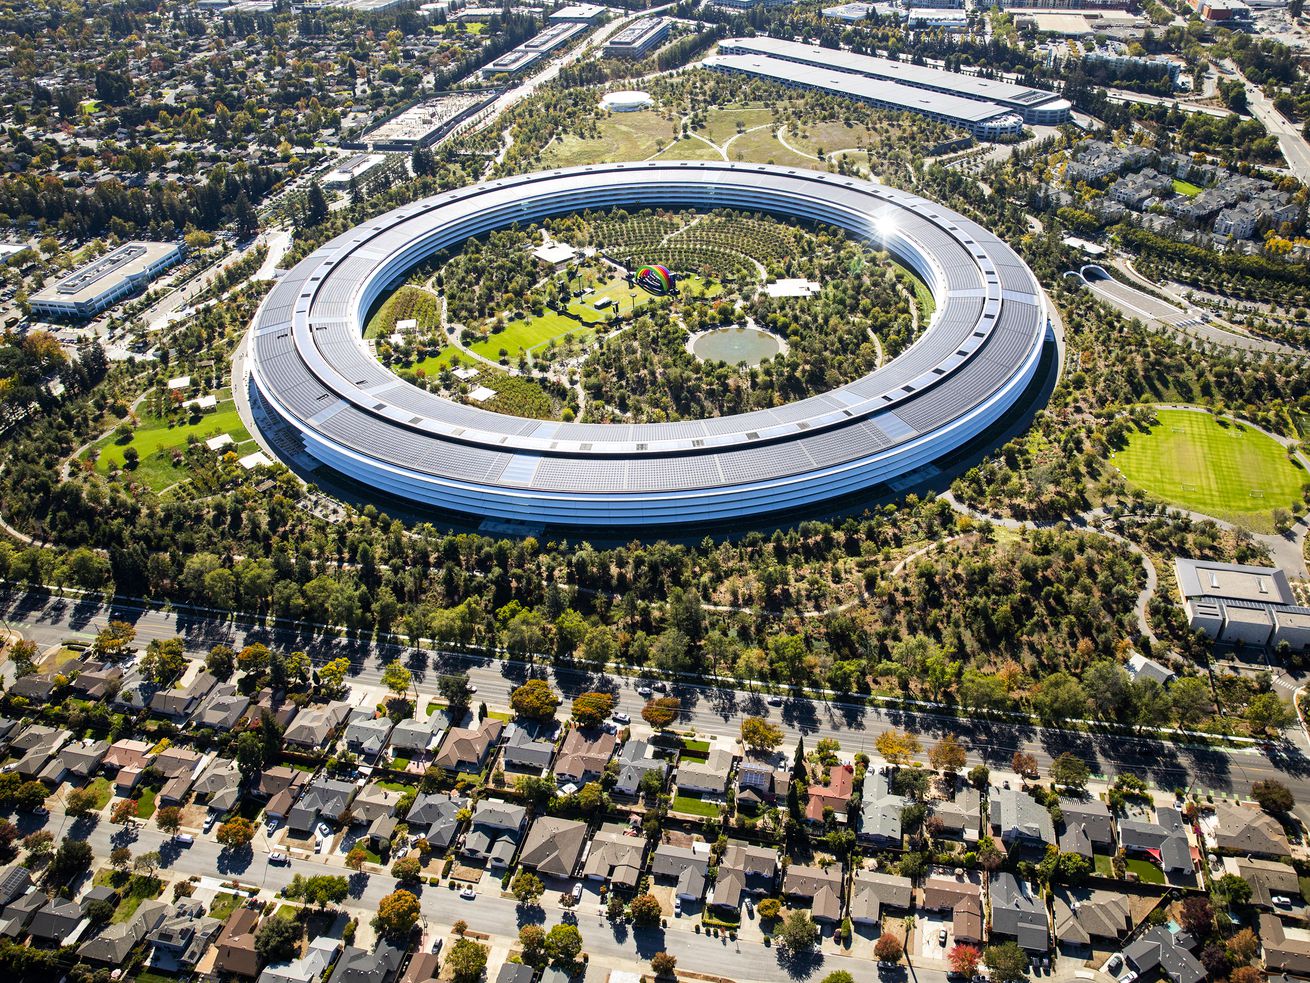 The ring-shaped Apple headquarters building in Cupertino, California, seen from the air.